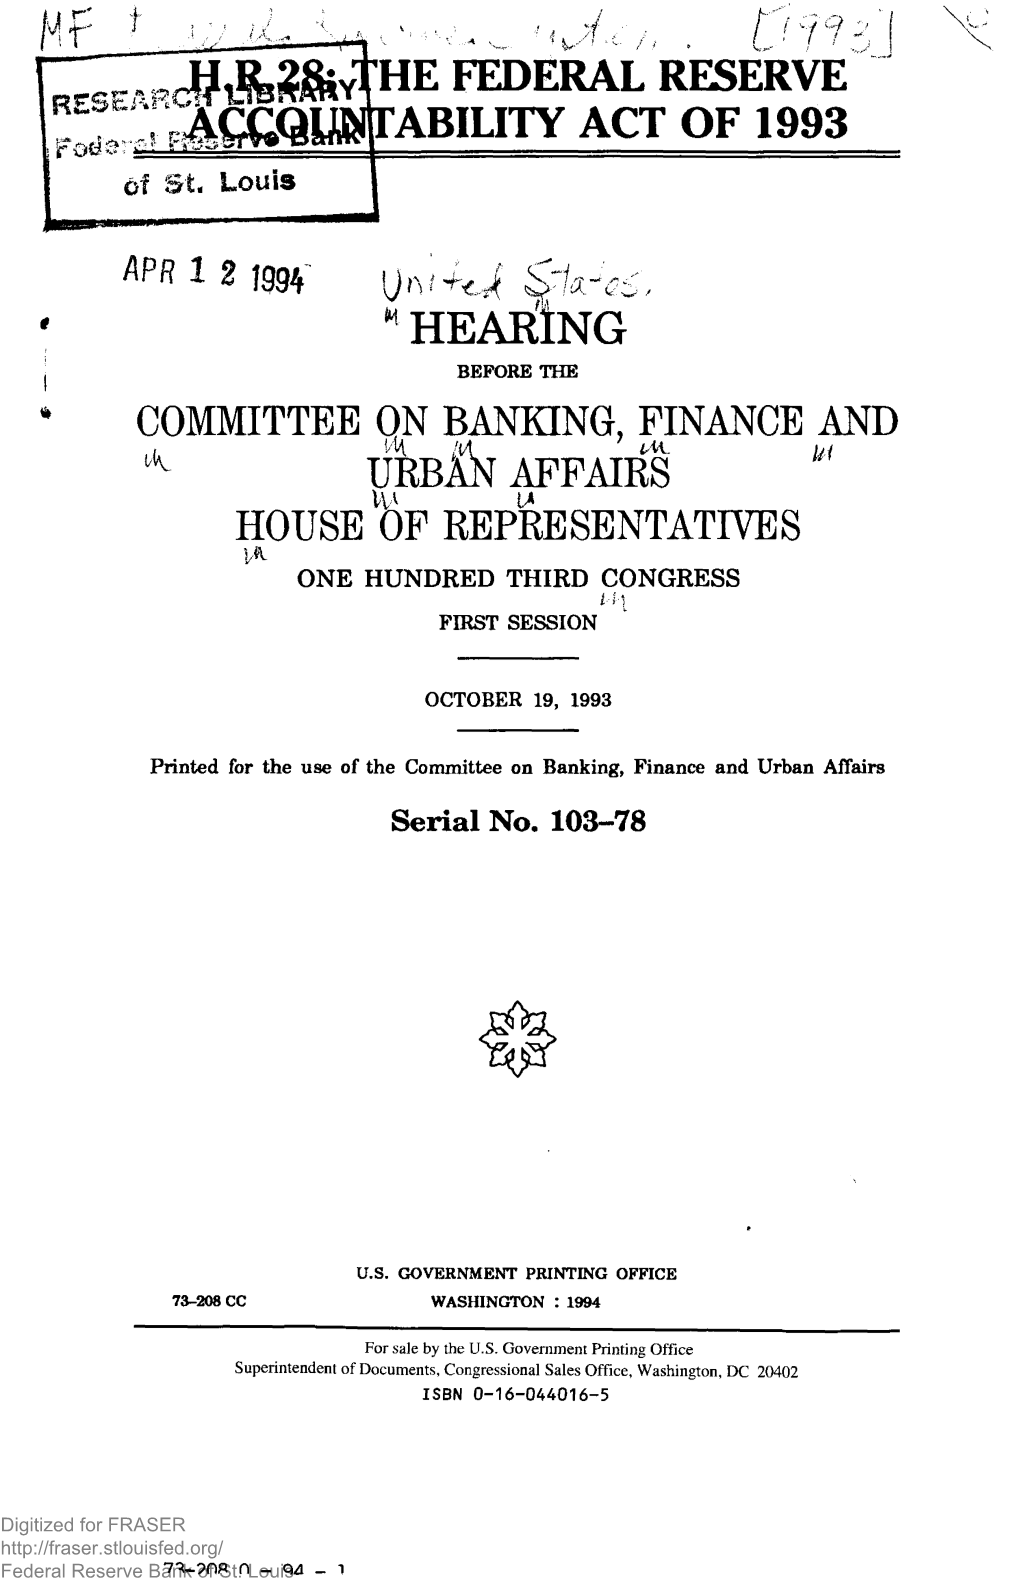 H.R. 28, the Federal Reserve Accountability Act of 1993 : Hearing